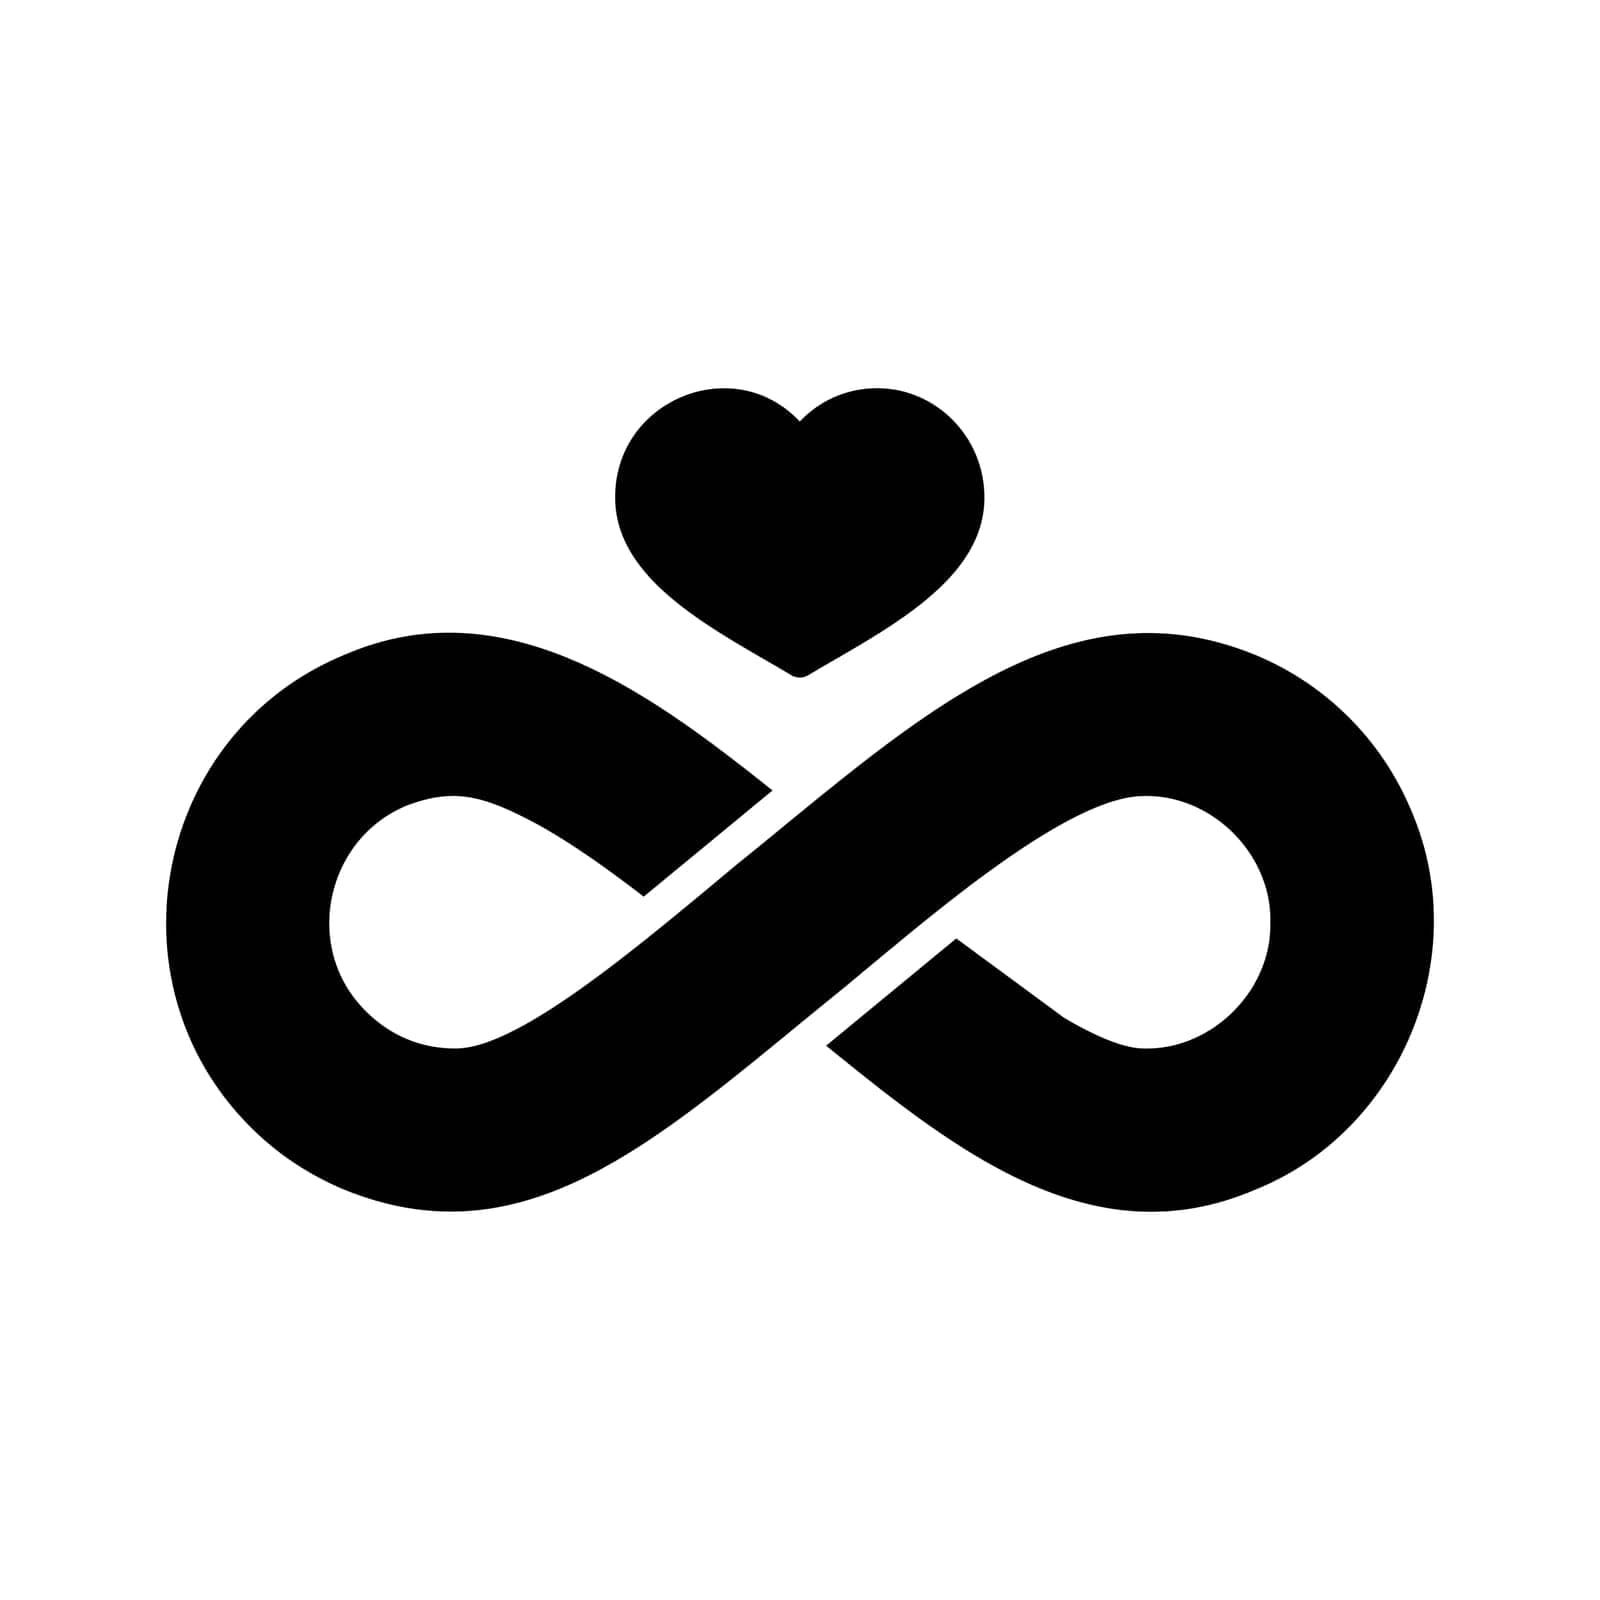 Infinity sign and heart symbol of eternal love by nosik